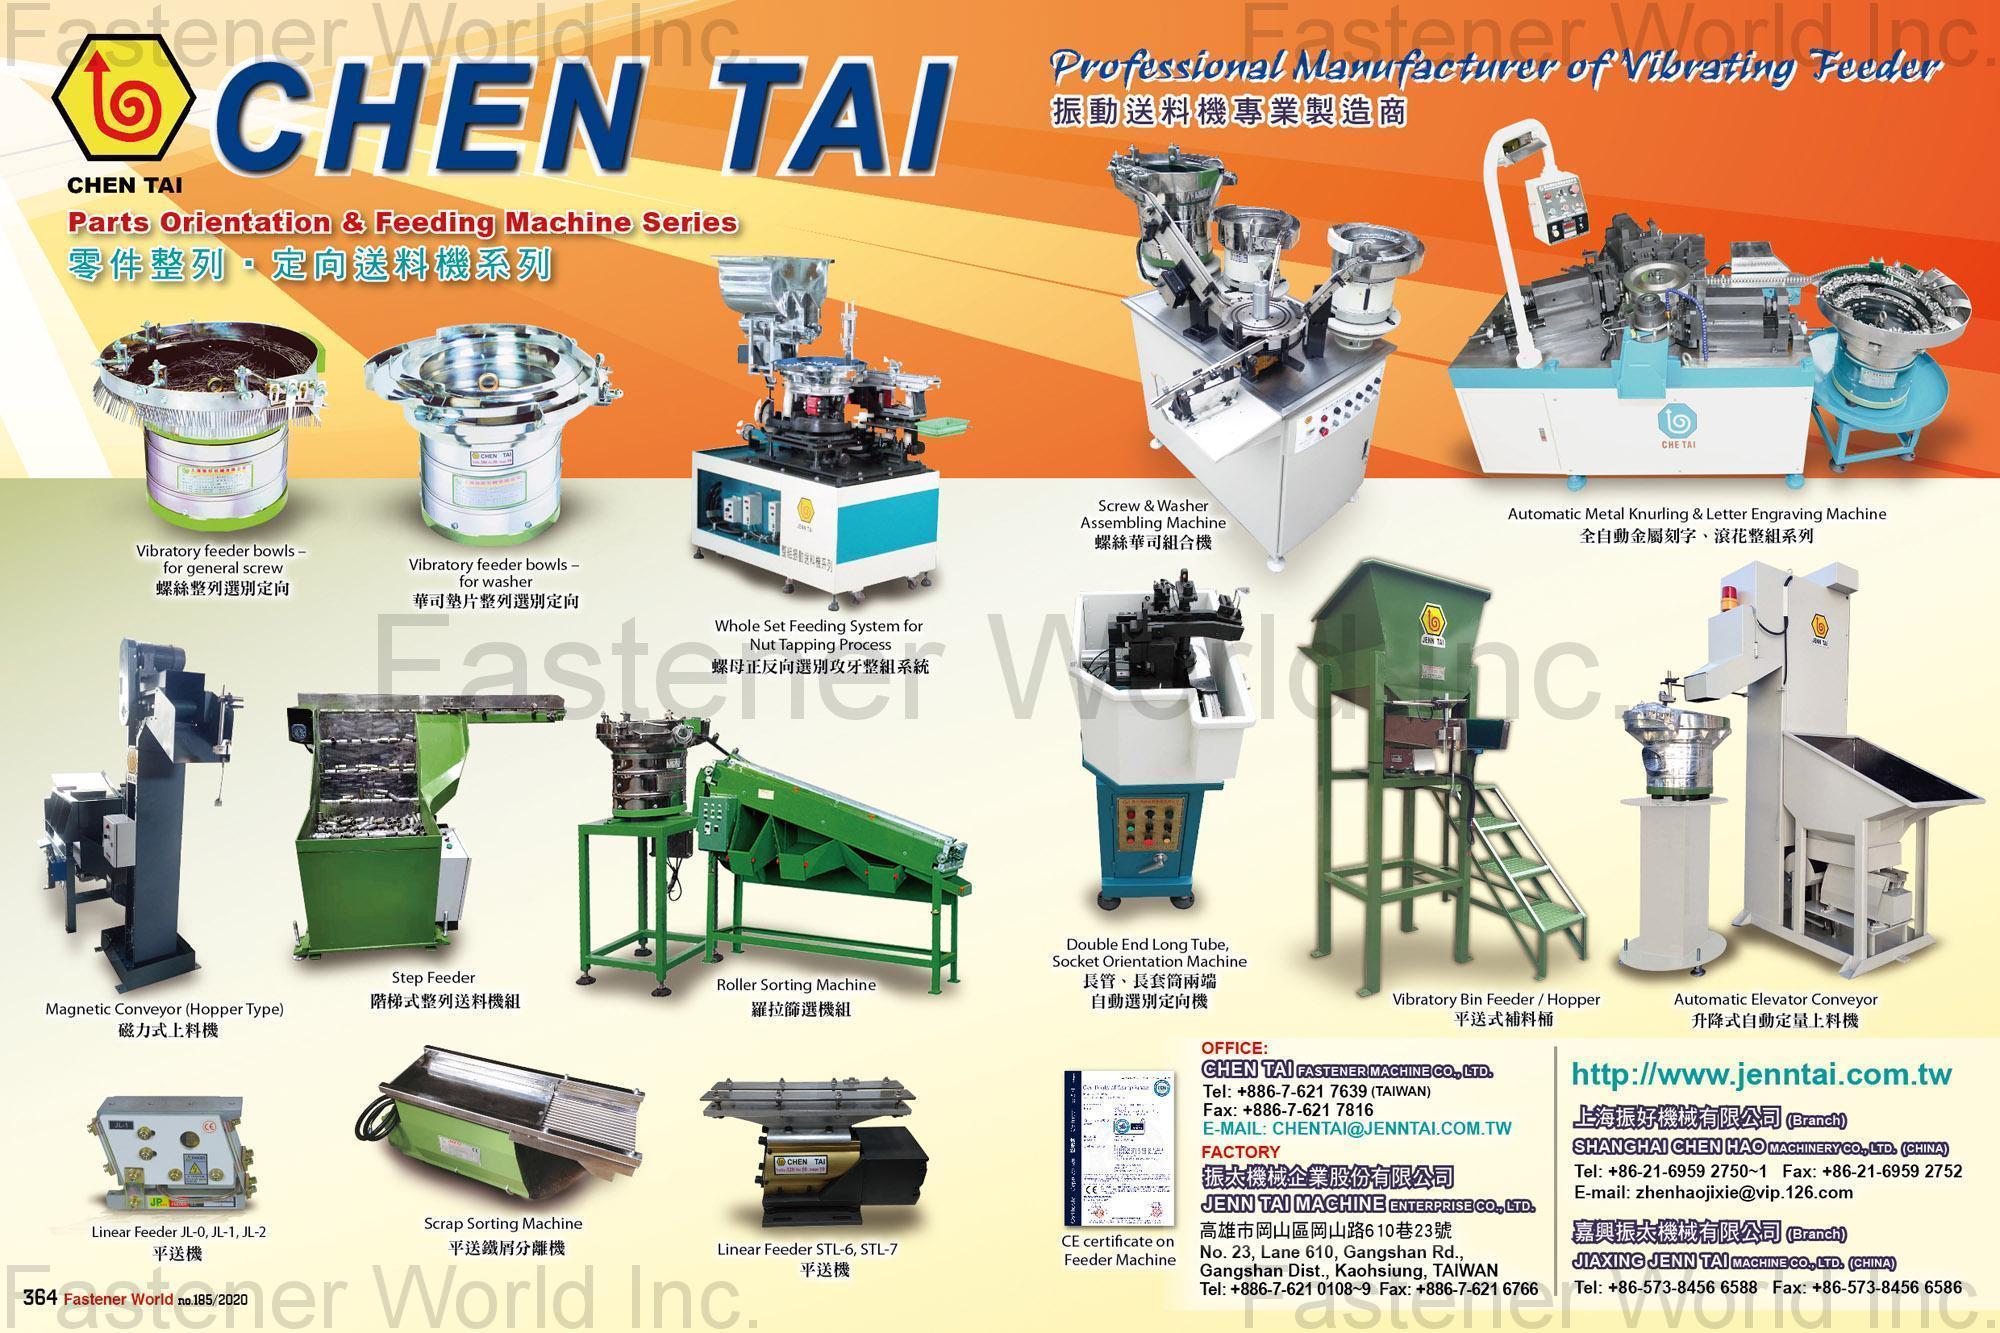 CHEN TAI FASTENER MACHINE CO., LTD. , Parts Orientation,Feeding Machine,Vibratory feeder bowls for general screw,Vibratory feeder bowls for washer,Whole set feeding system for nut tapping process,Magnetic Conveyor(Hopper Type),Step Feeder,Roller Sorting Machine,Linear Feeder JL-0/JL-1/JL-2,Scrap Sorting Machine,Linear Feeder STL-6/STL-7,Vibratory feeder,Screw & Washer Assembling Machine,Automatic Metal Knurling & Letter Engraving Machine,Double End Long Tube/Socket Orientation Machine,Vibratory Bin Feeder/Hopper,Automatic Elevator Conveyor